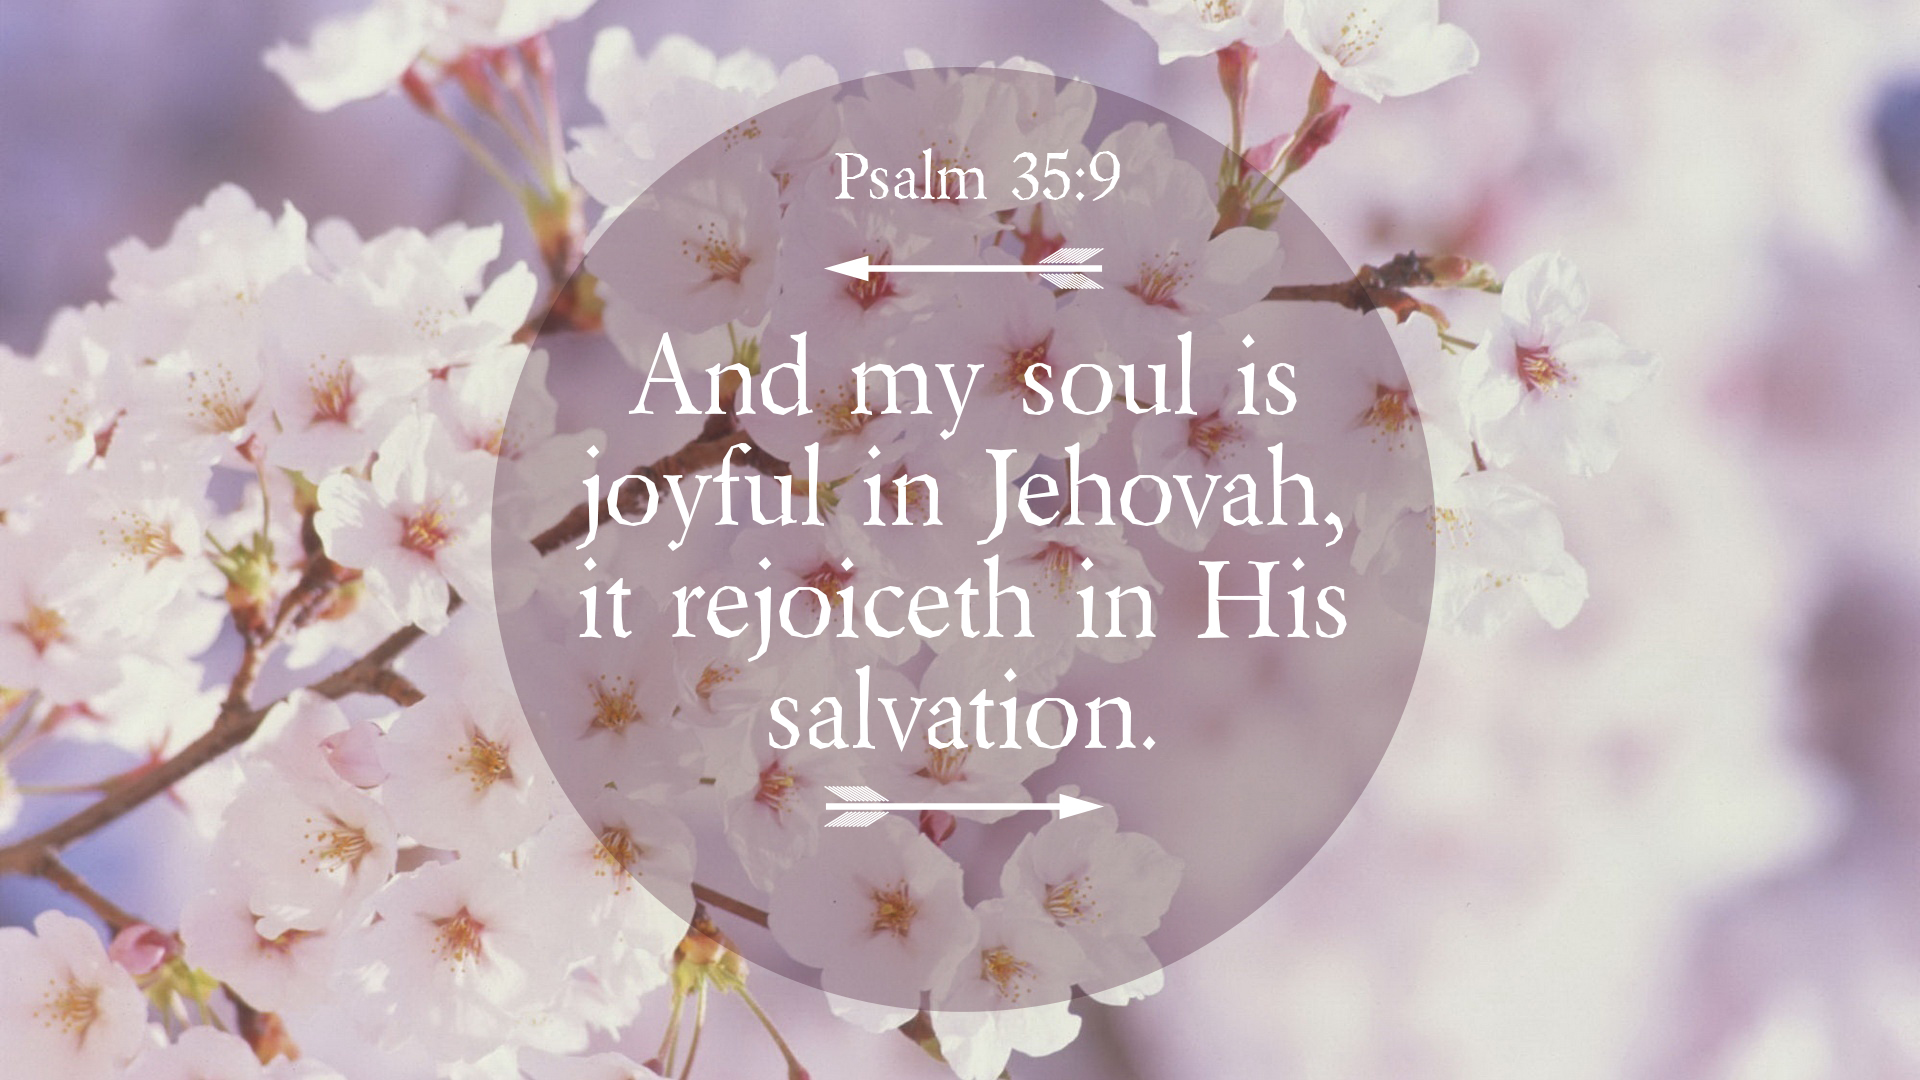 And my soul is joyful in Jehovah, it rejoiceth in His salvation.